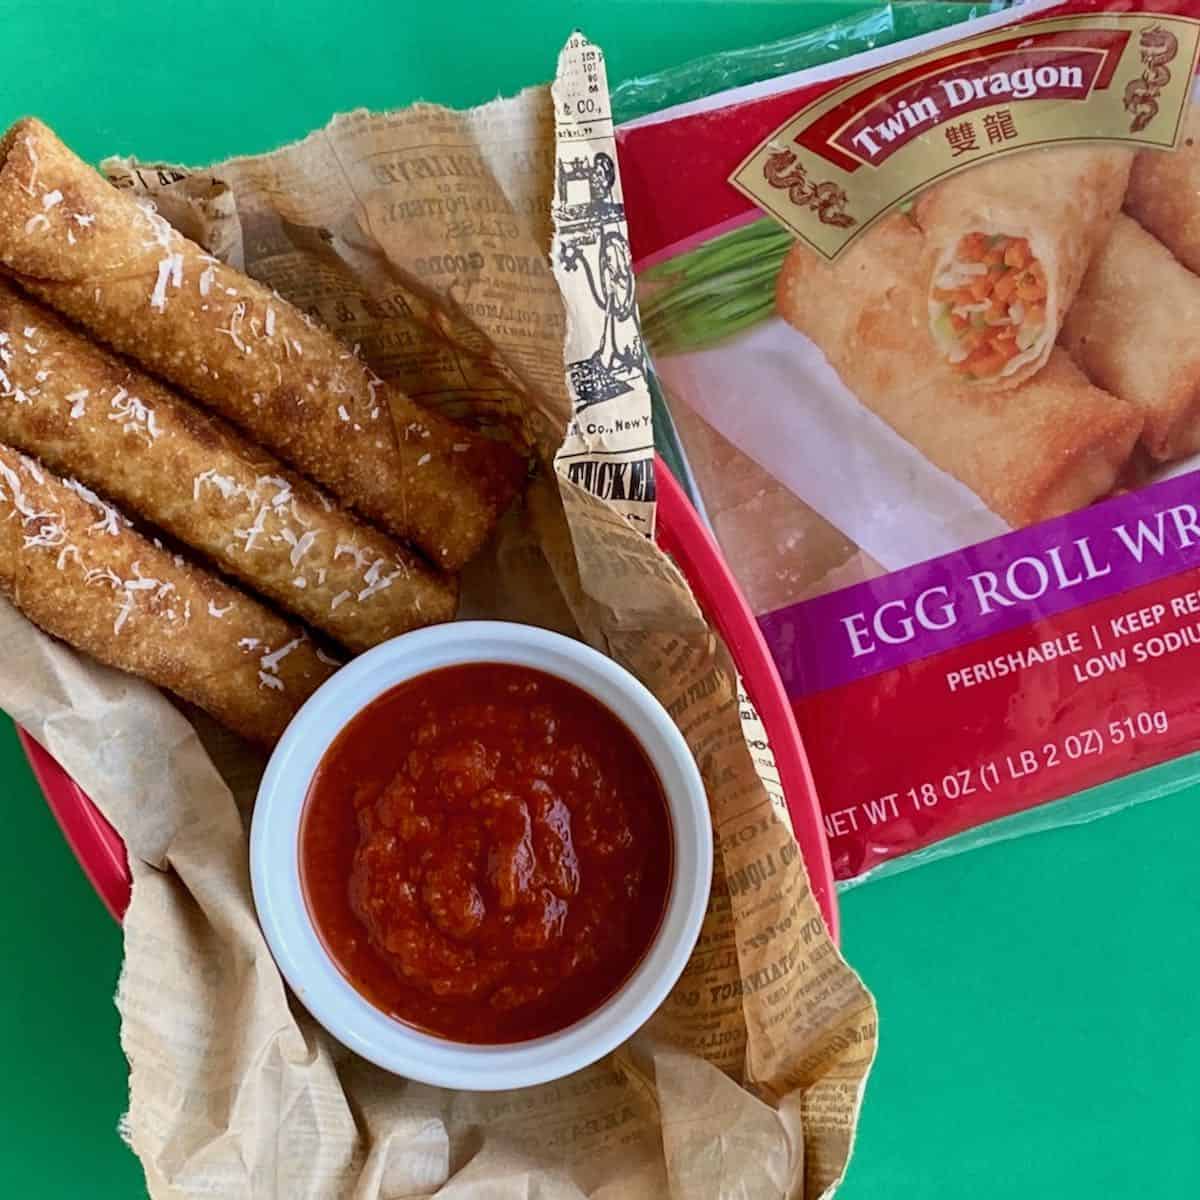 Over head view of egg rolls in a paper lined basket with product package.